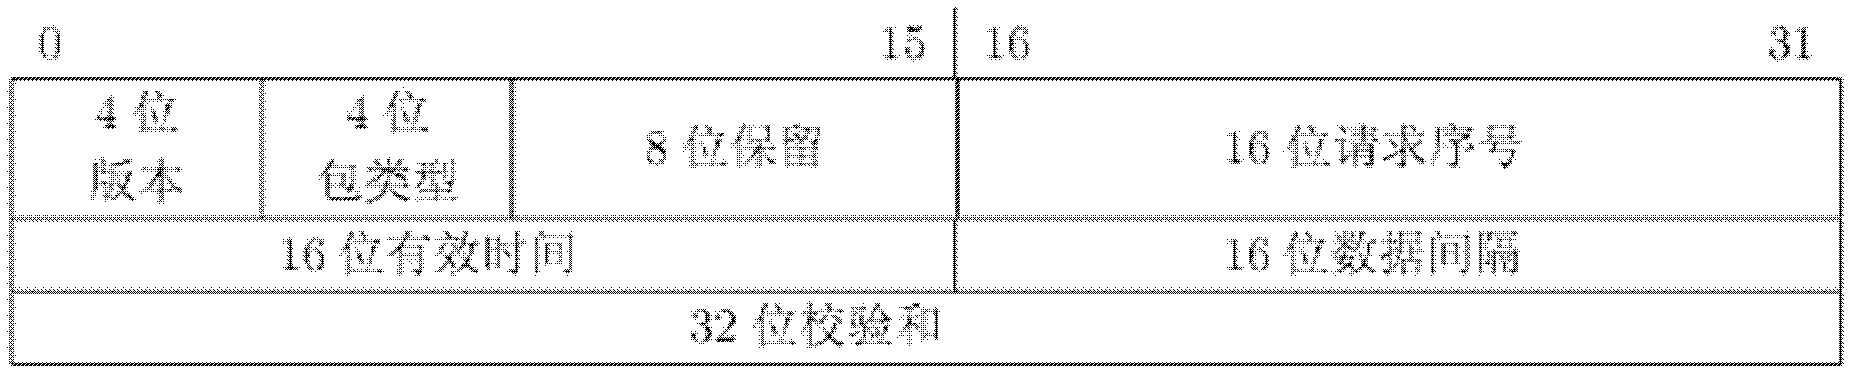 Packet switching network efficient real-time data interaction protocol and communication method